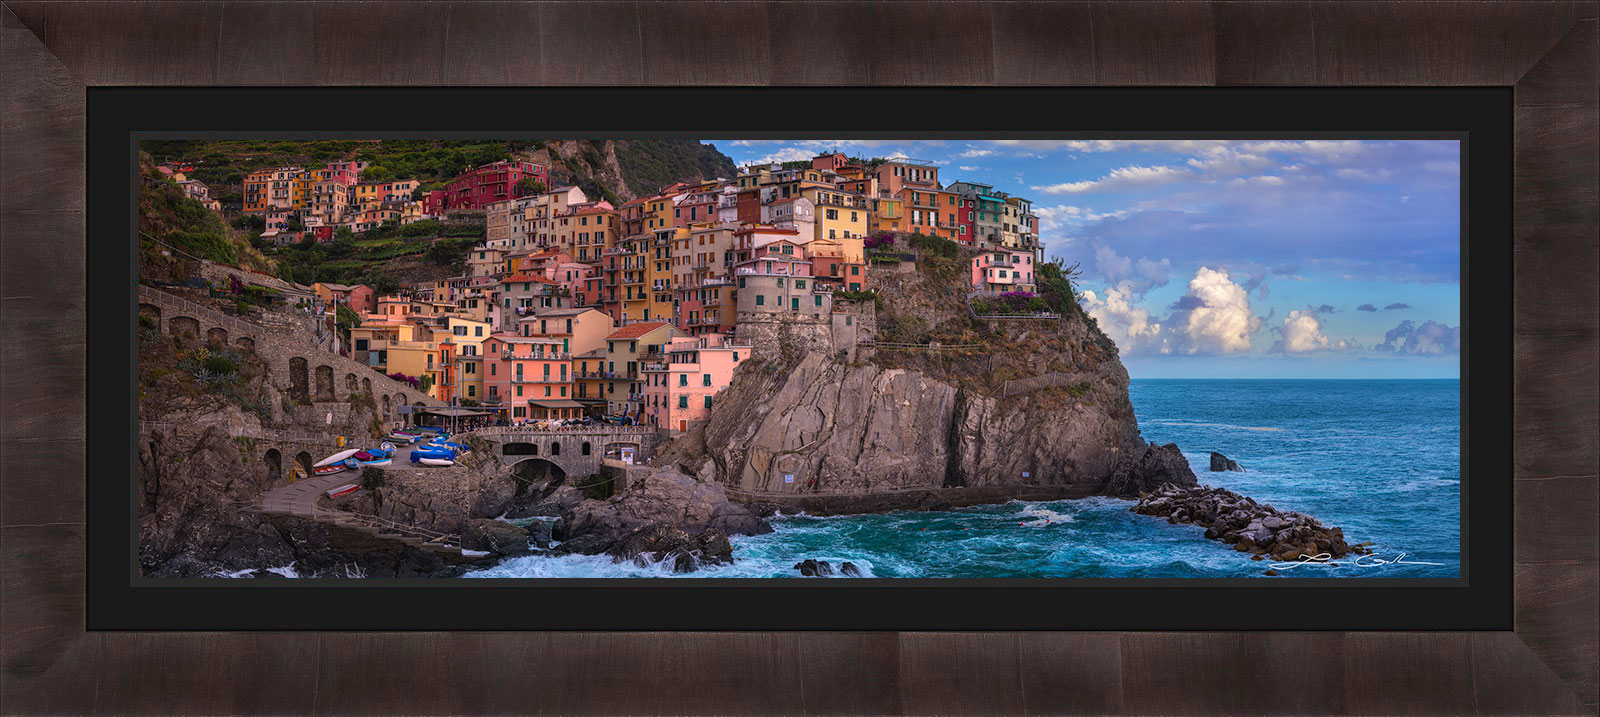 A framed print of Manarola, Italy with colorful houses on a sea shore